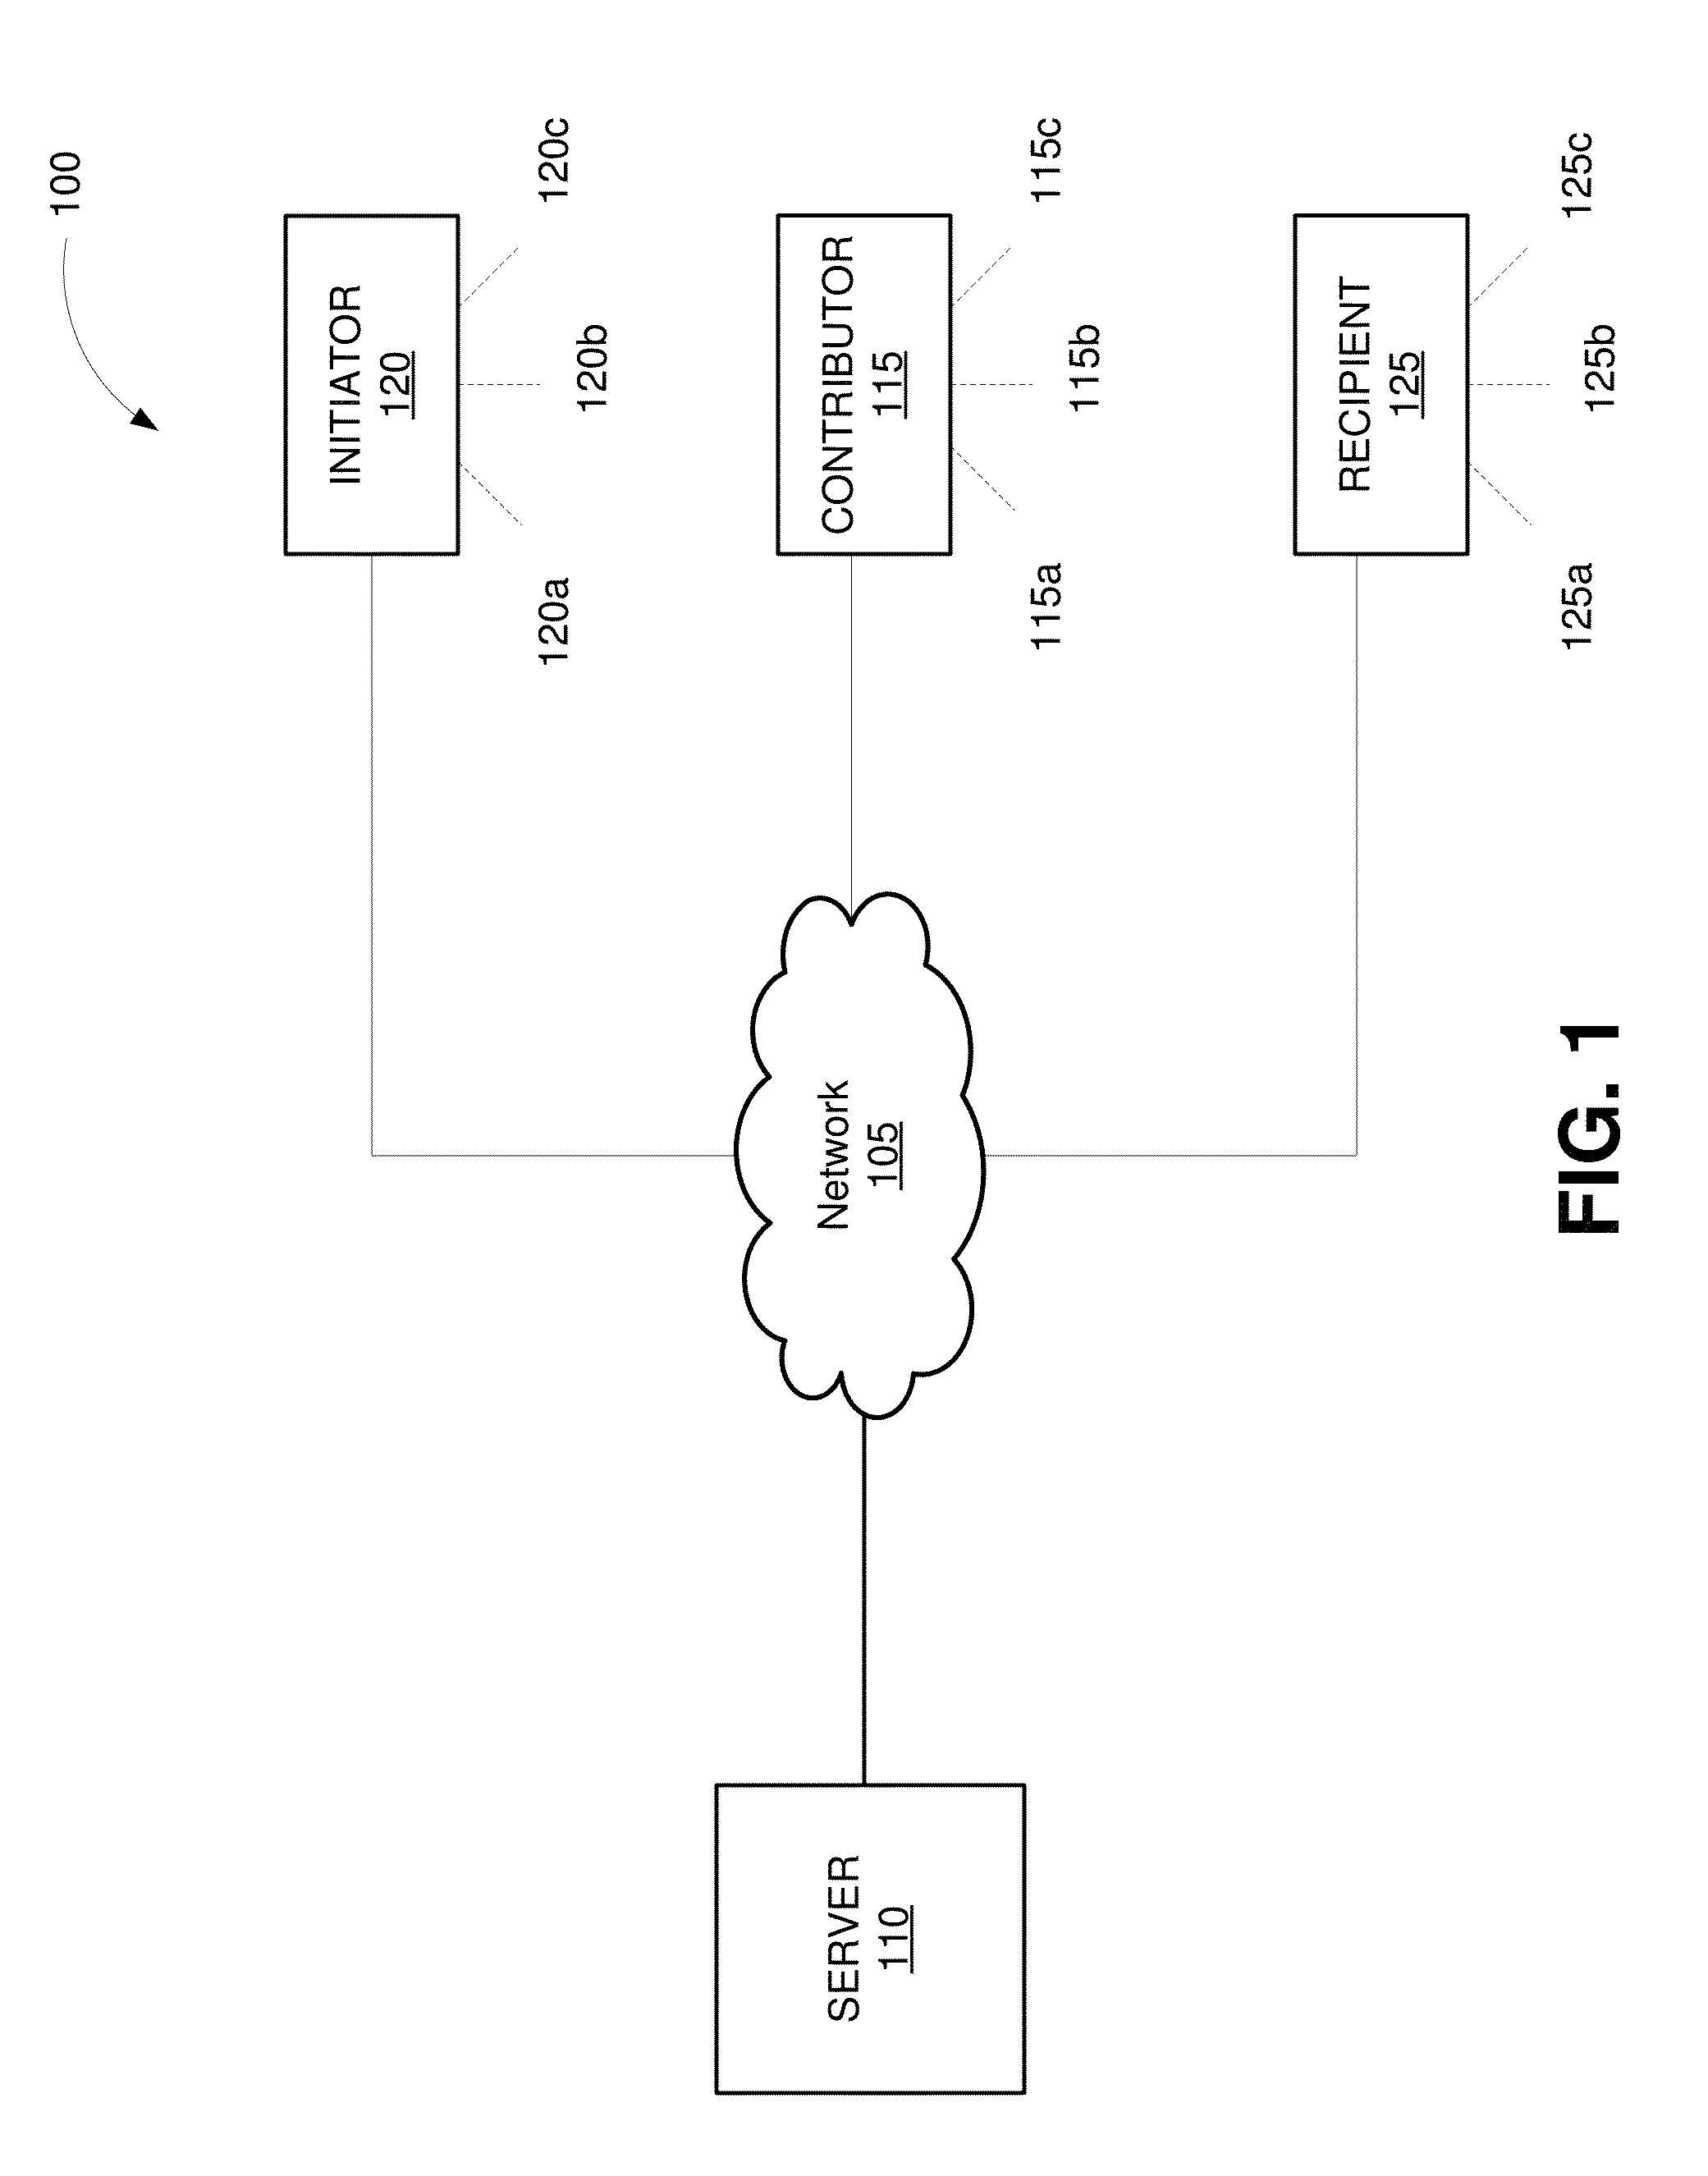 Systems and methods for creating and accessing collaborative electronic multimedia compositions